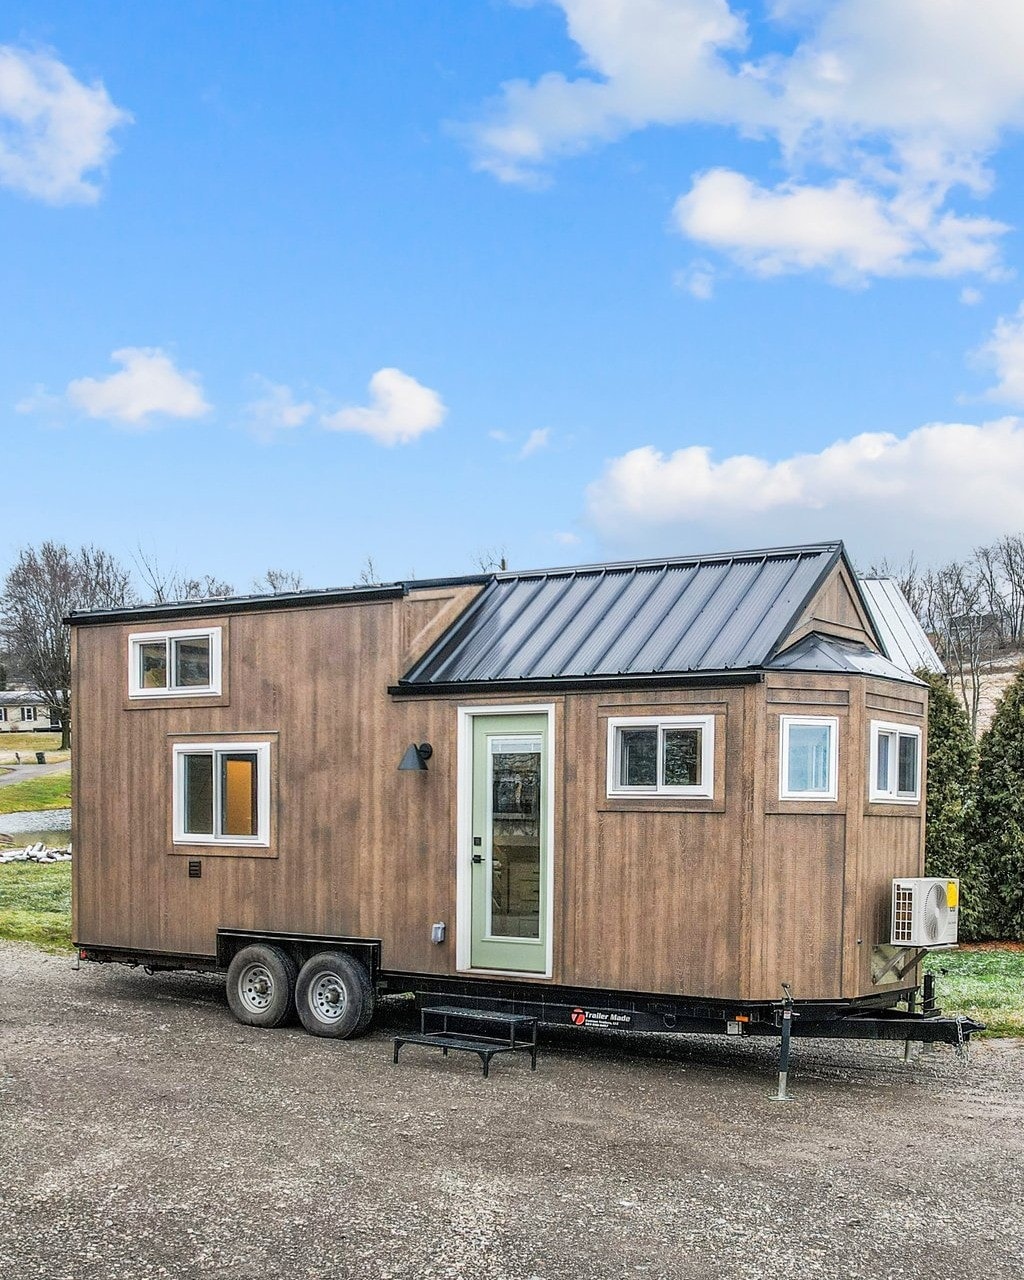 24 Modern Tiny Homes You Can Buy, Build, Rent or Admire